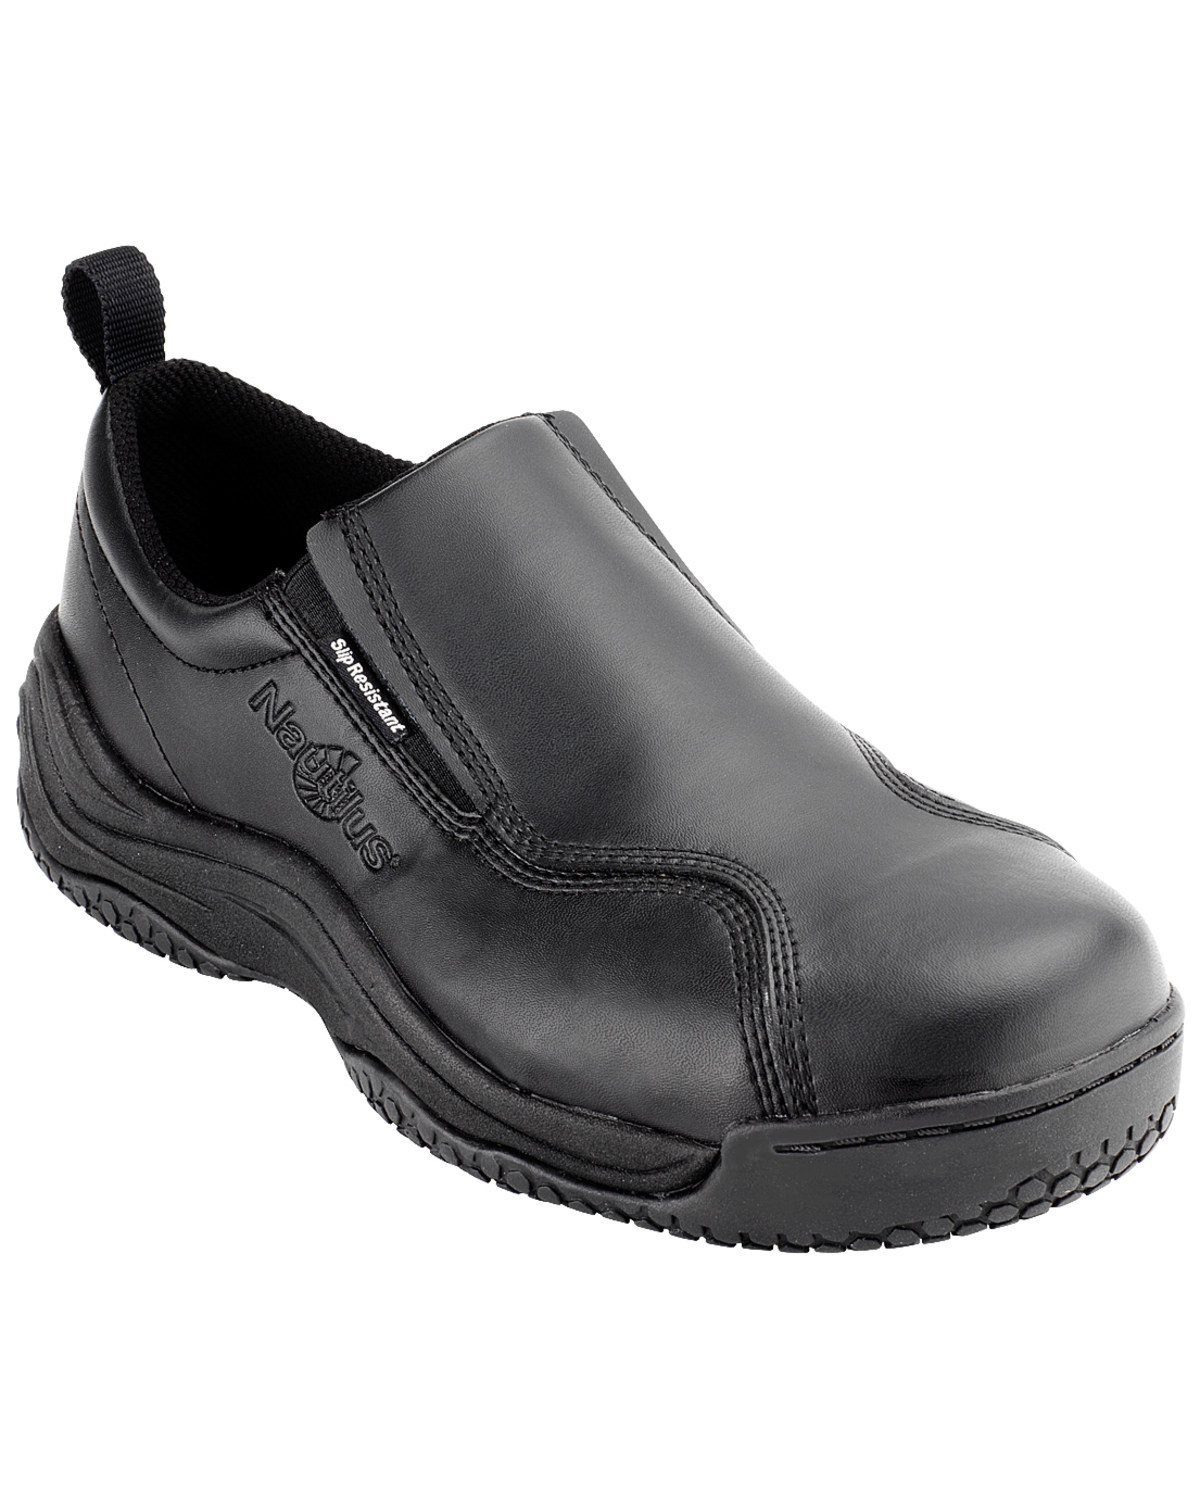 womens slip on safety shoes